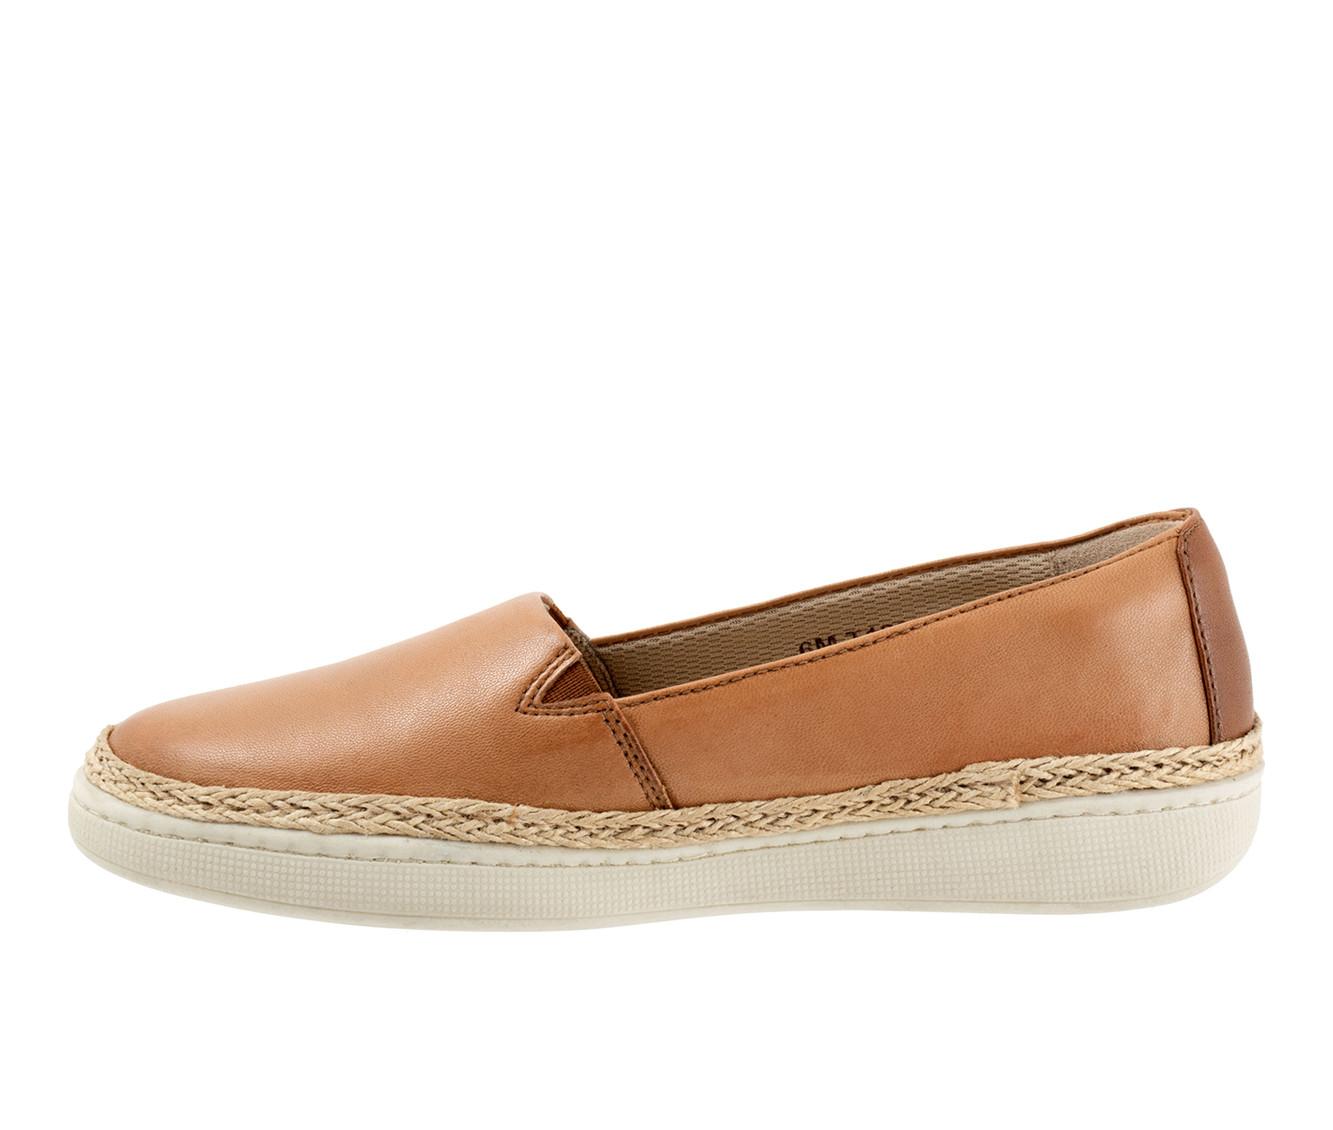 Women's Trotters Accent Slip-On Shoes